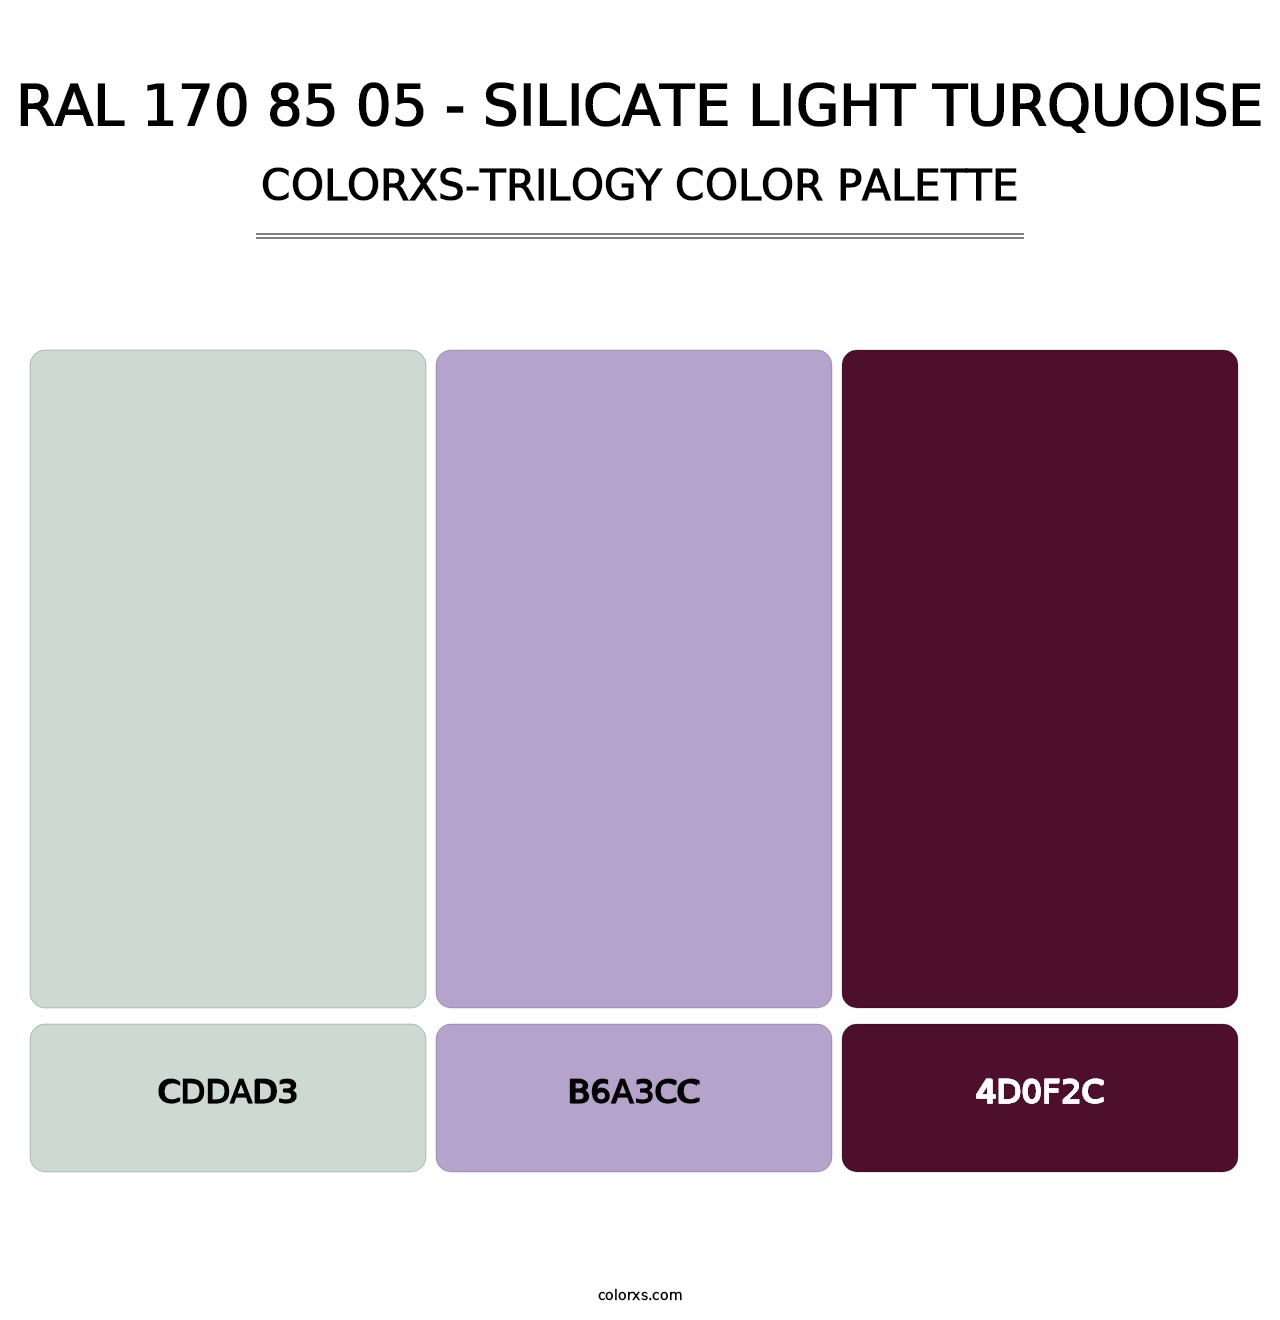 RAL 170 85 05 - Silicate Light Turquoise - Colorxs Trilogy Palette